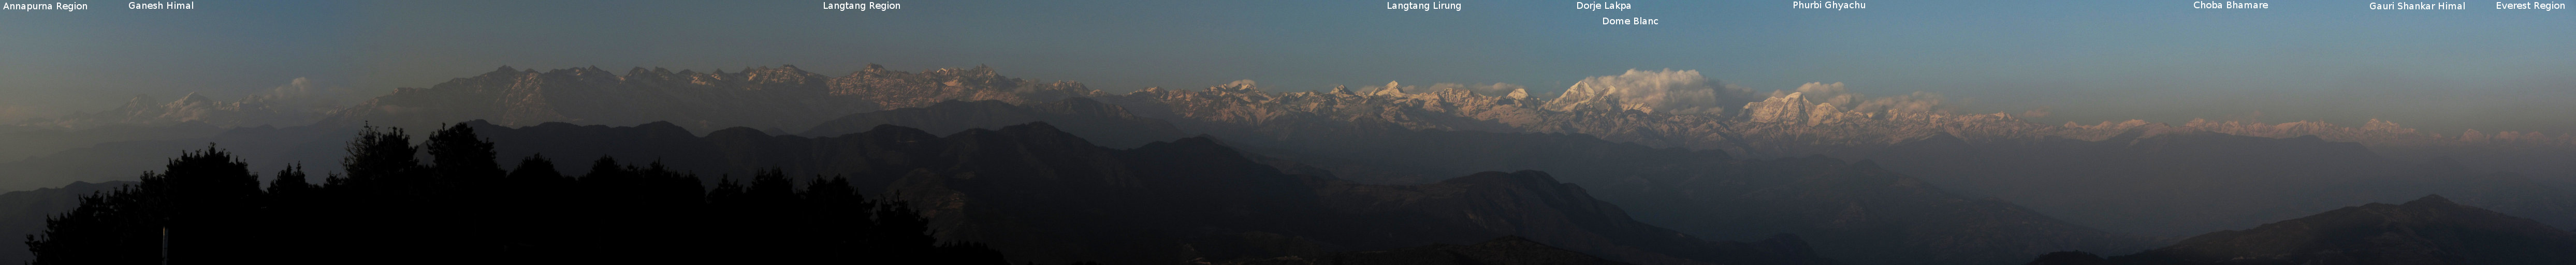 Annotated panorama of the Himalayas from Annapurna to Langtang to Everest. (Category:  Travel)